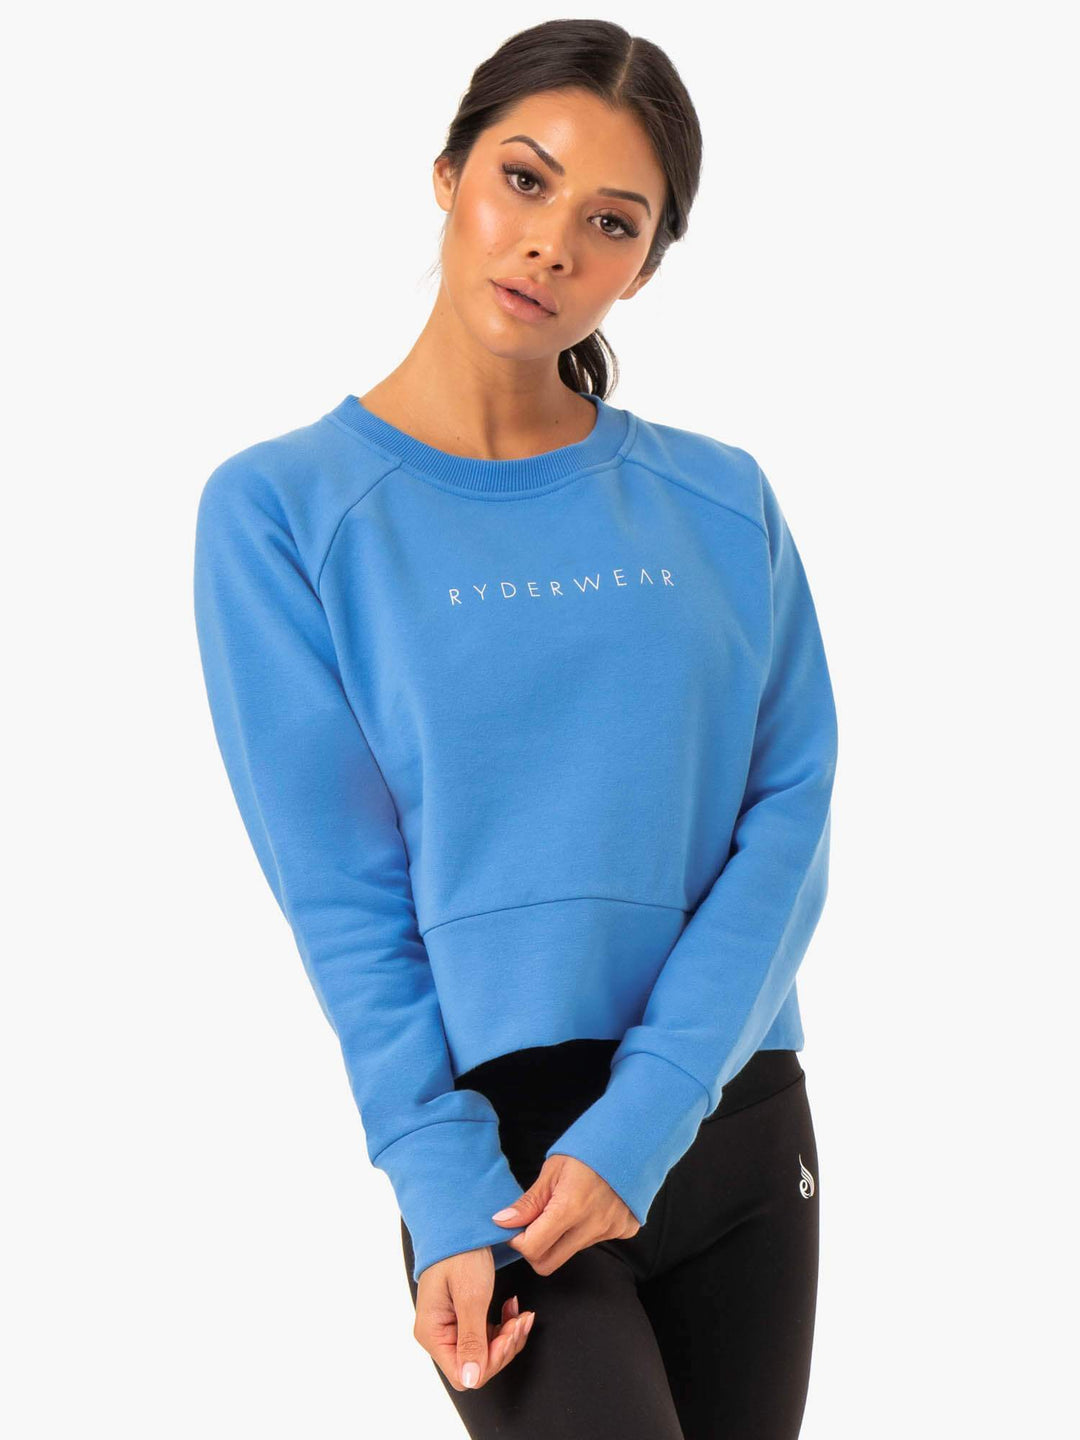 Motion Sweater - Blue Clothing Ryderwear 